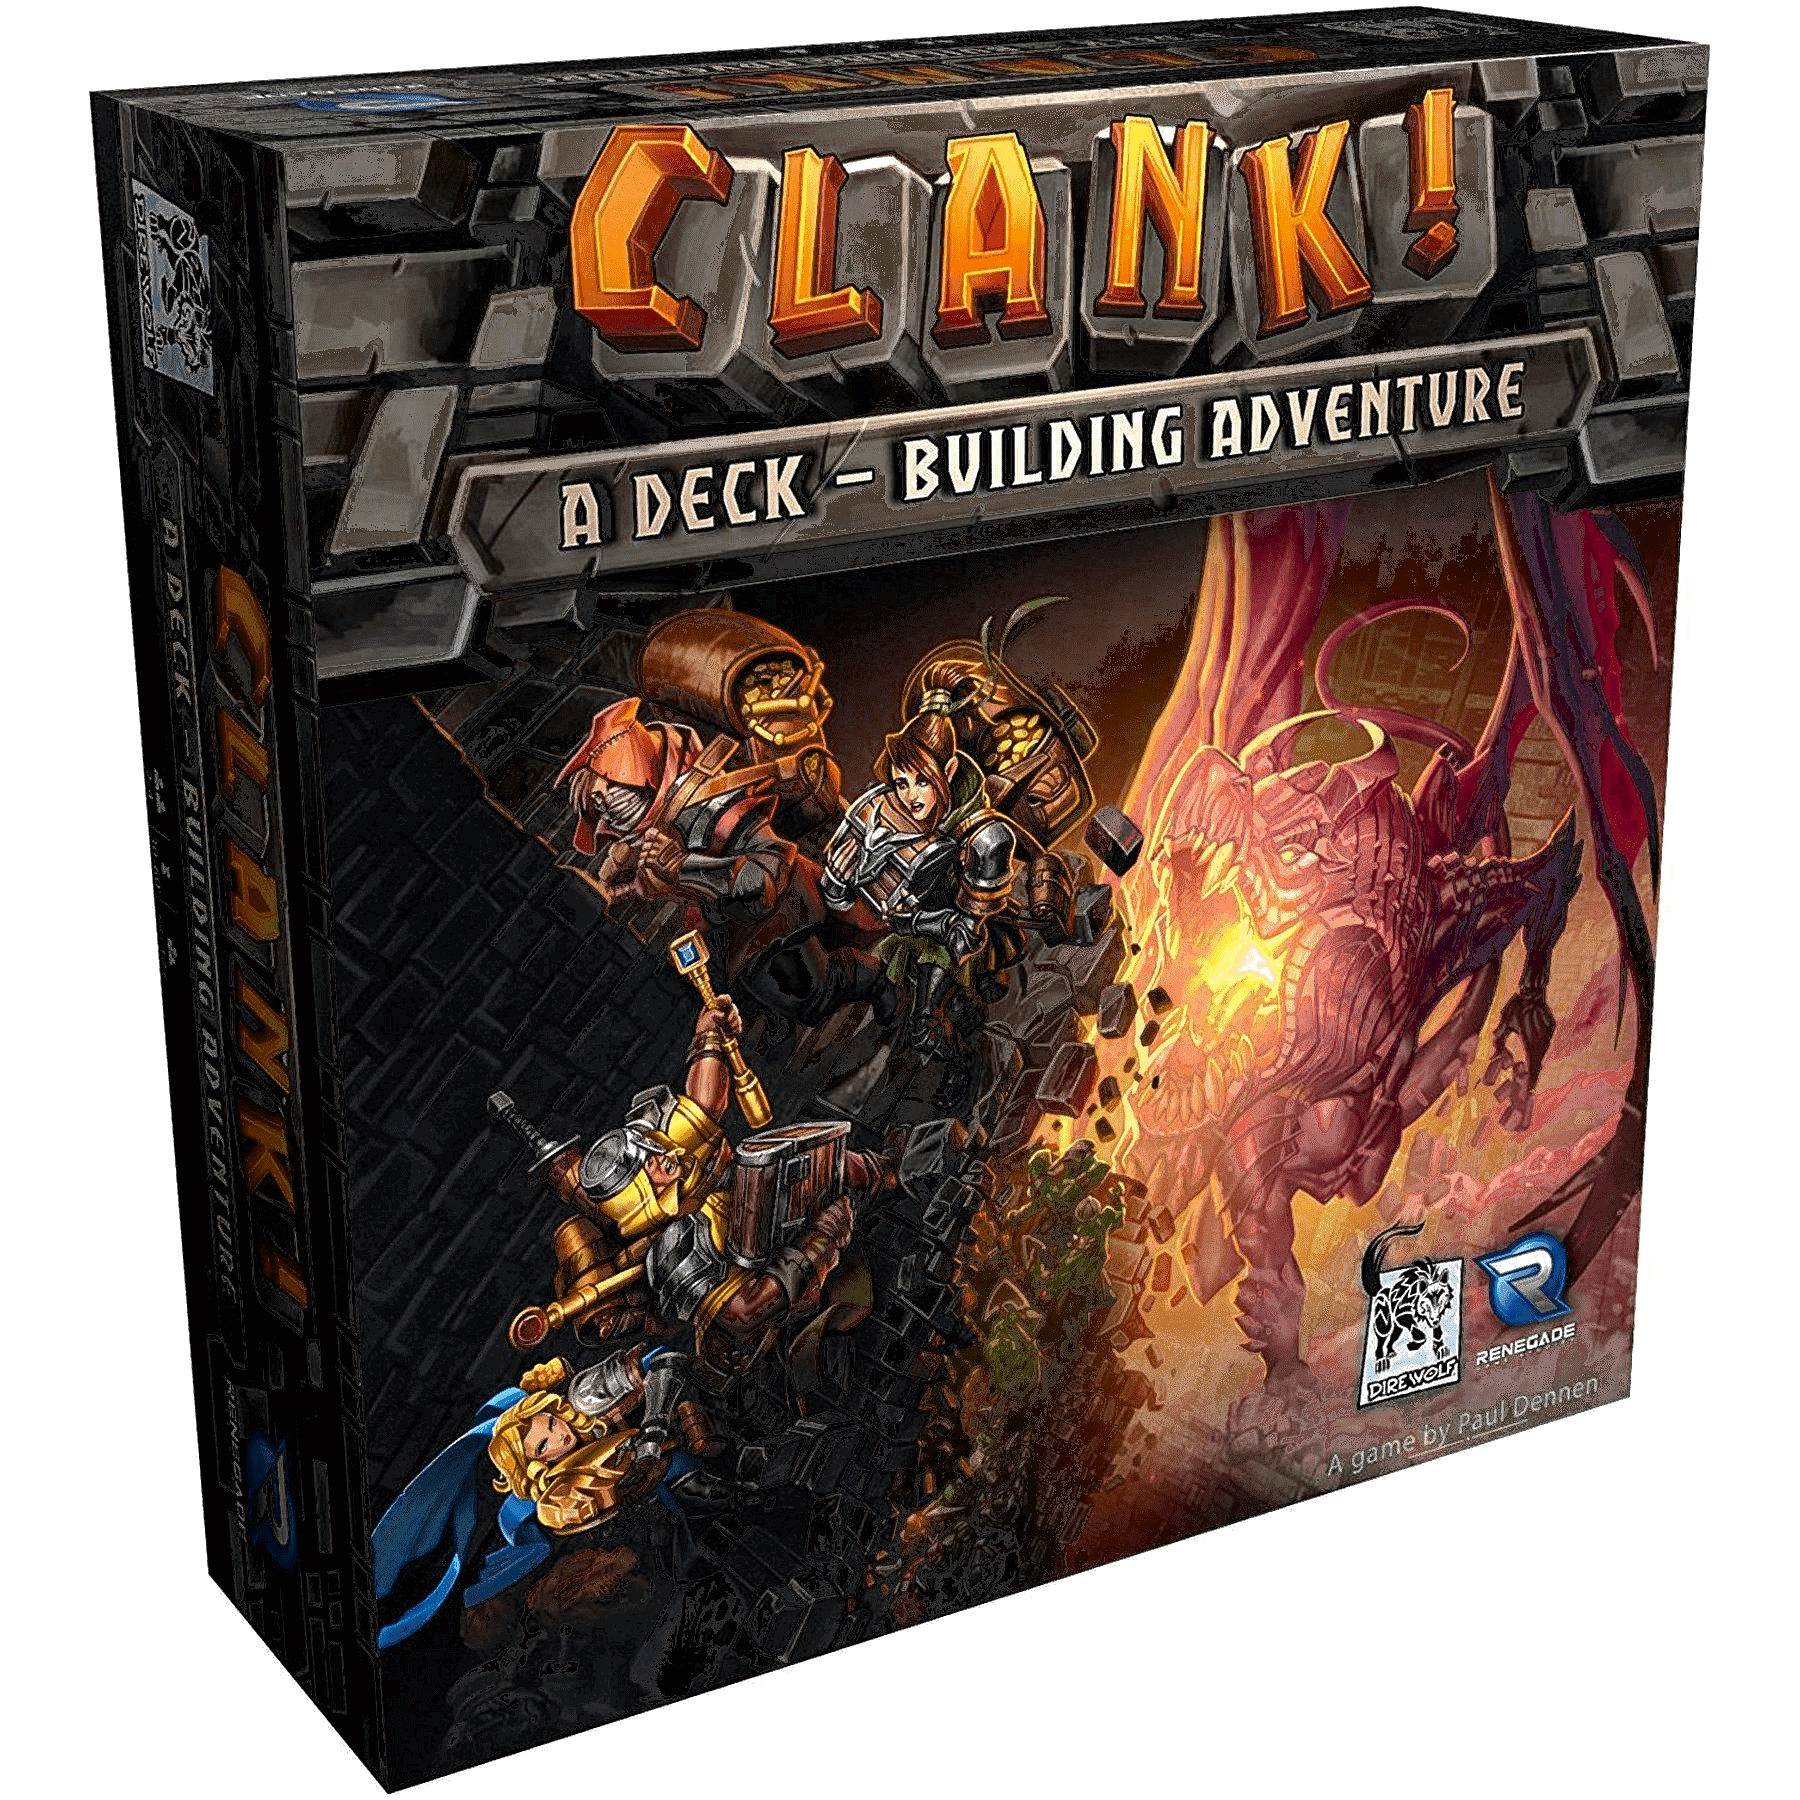 Clank! A Deck-Building Adventure - Enter the Dragon's Lair and Steal to Win!, Renegade Games, Card Game, clank-a-deck-building-adventure, Card Games, Dark Ninja Gaming LA